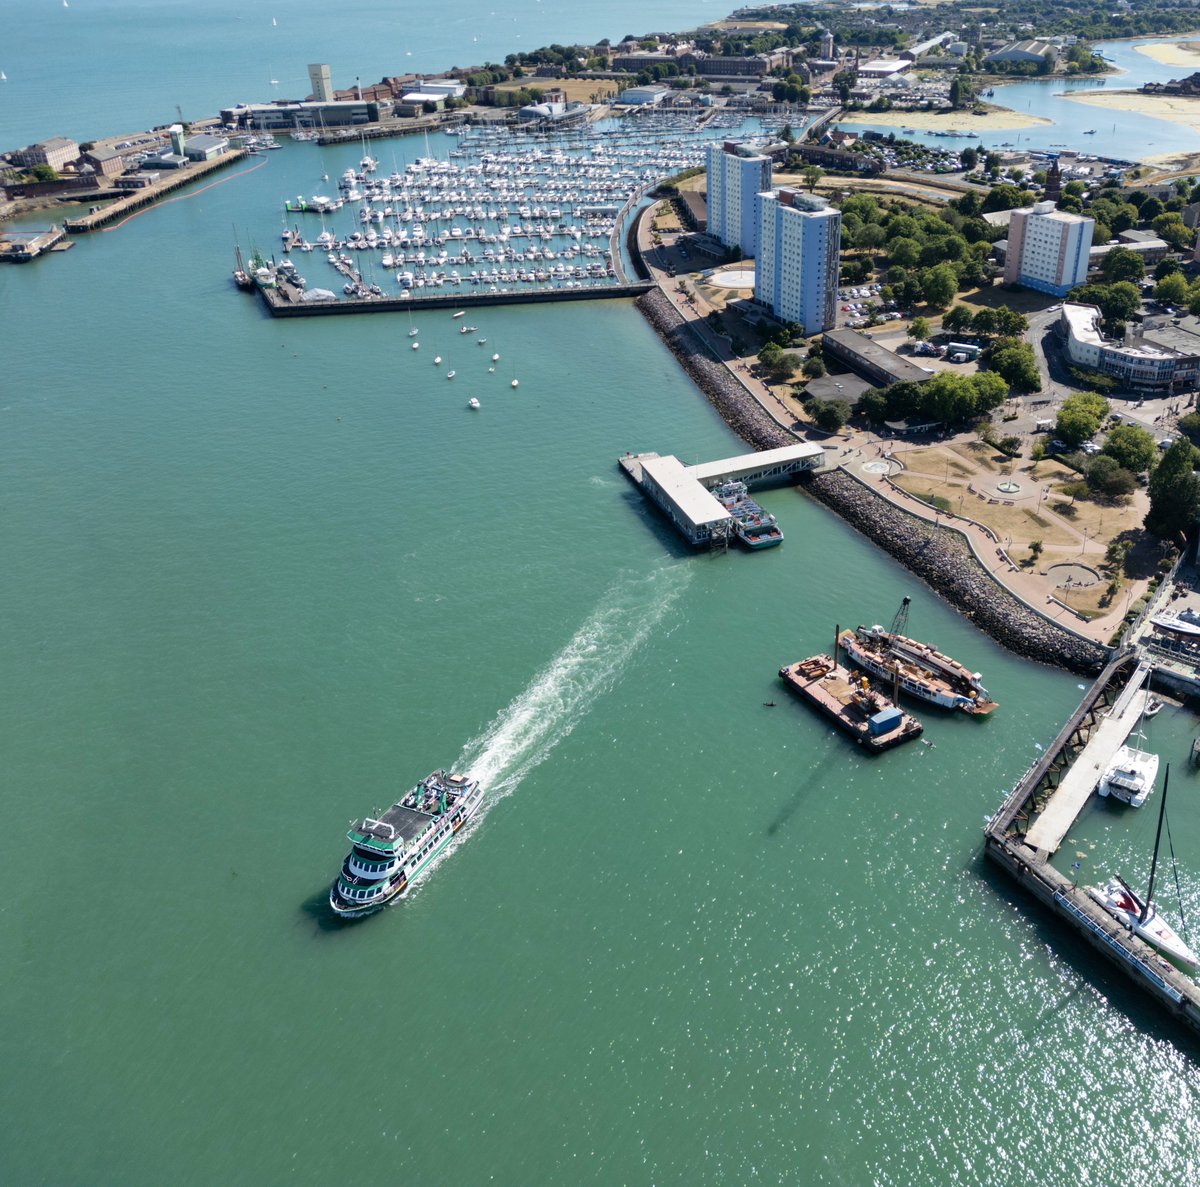 Aerial image: Gosport Ferry on its way to Portsmouth Harbour Station Pier #Gosport #Portsmouth #Harbour #ferry #aerial #image